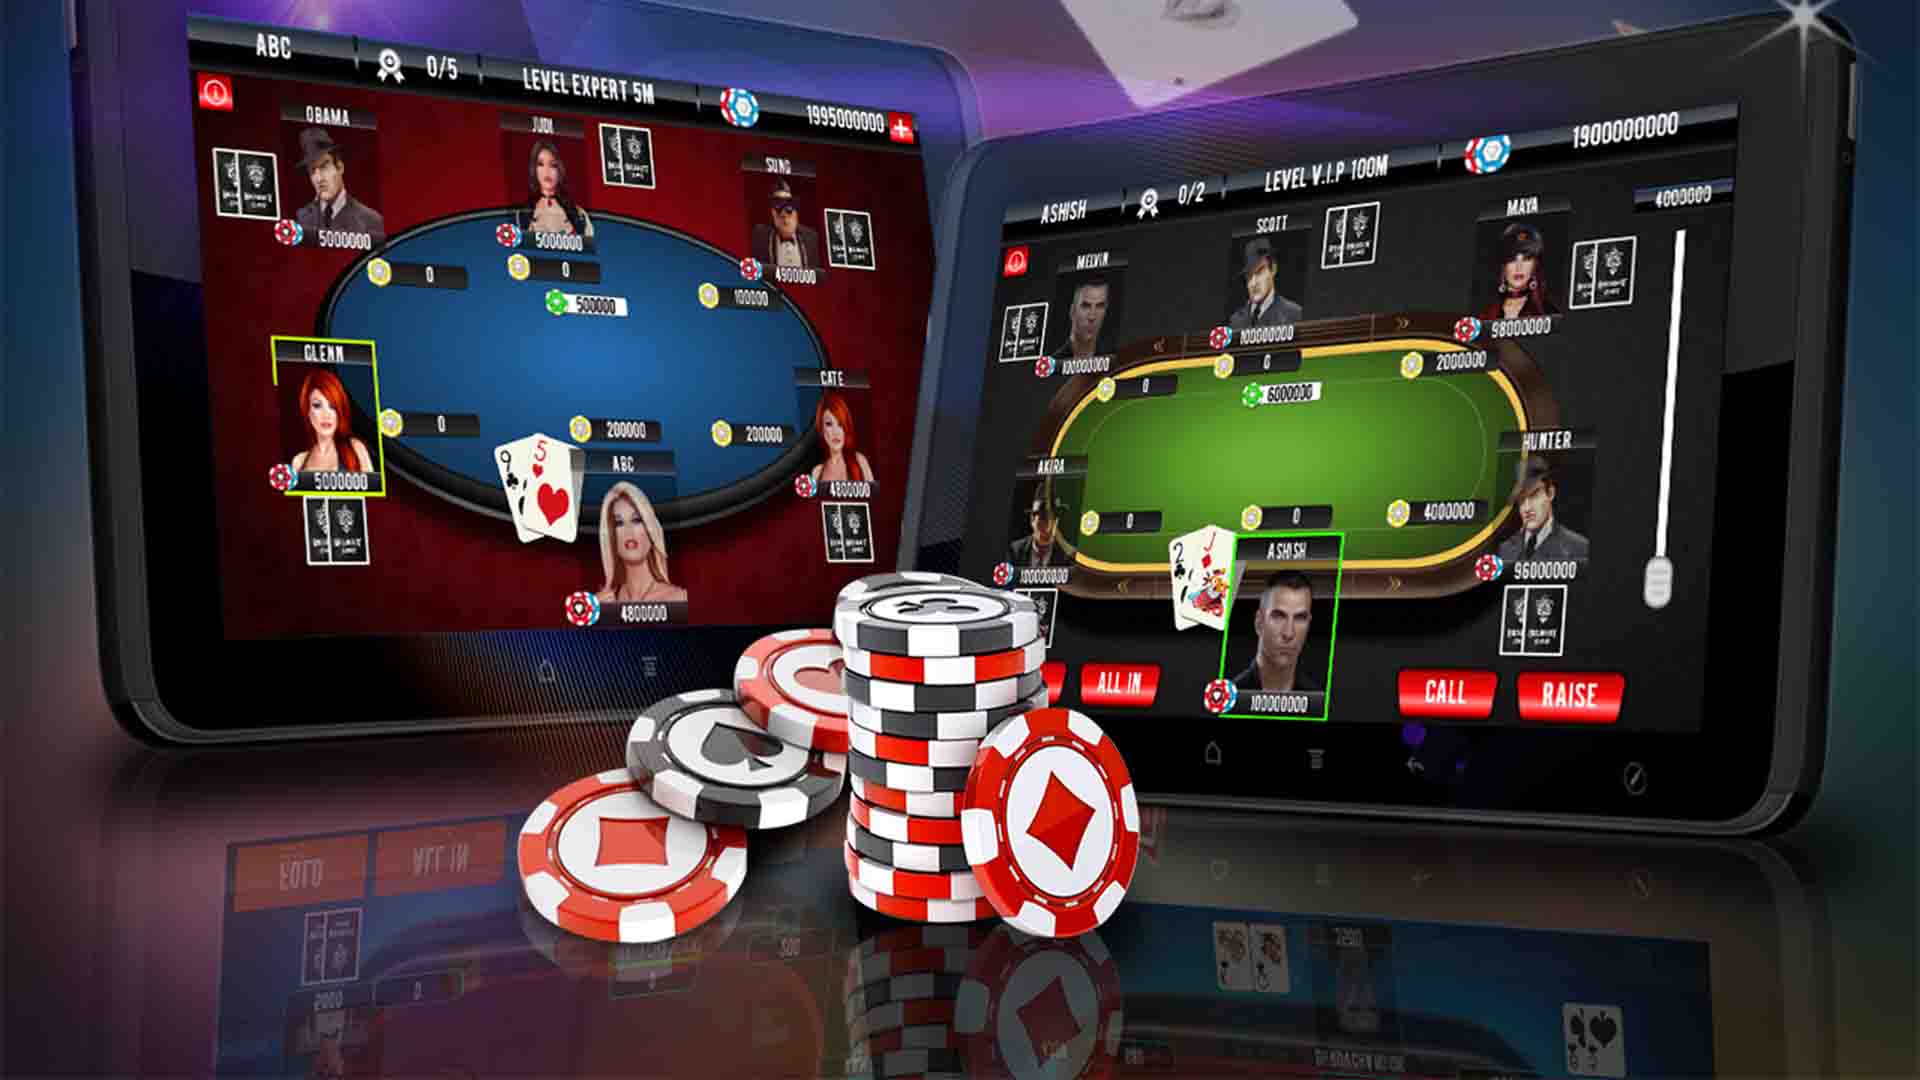 Your Most Burning Questions About The Online Casino